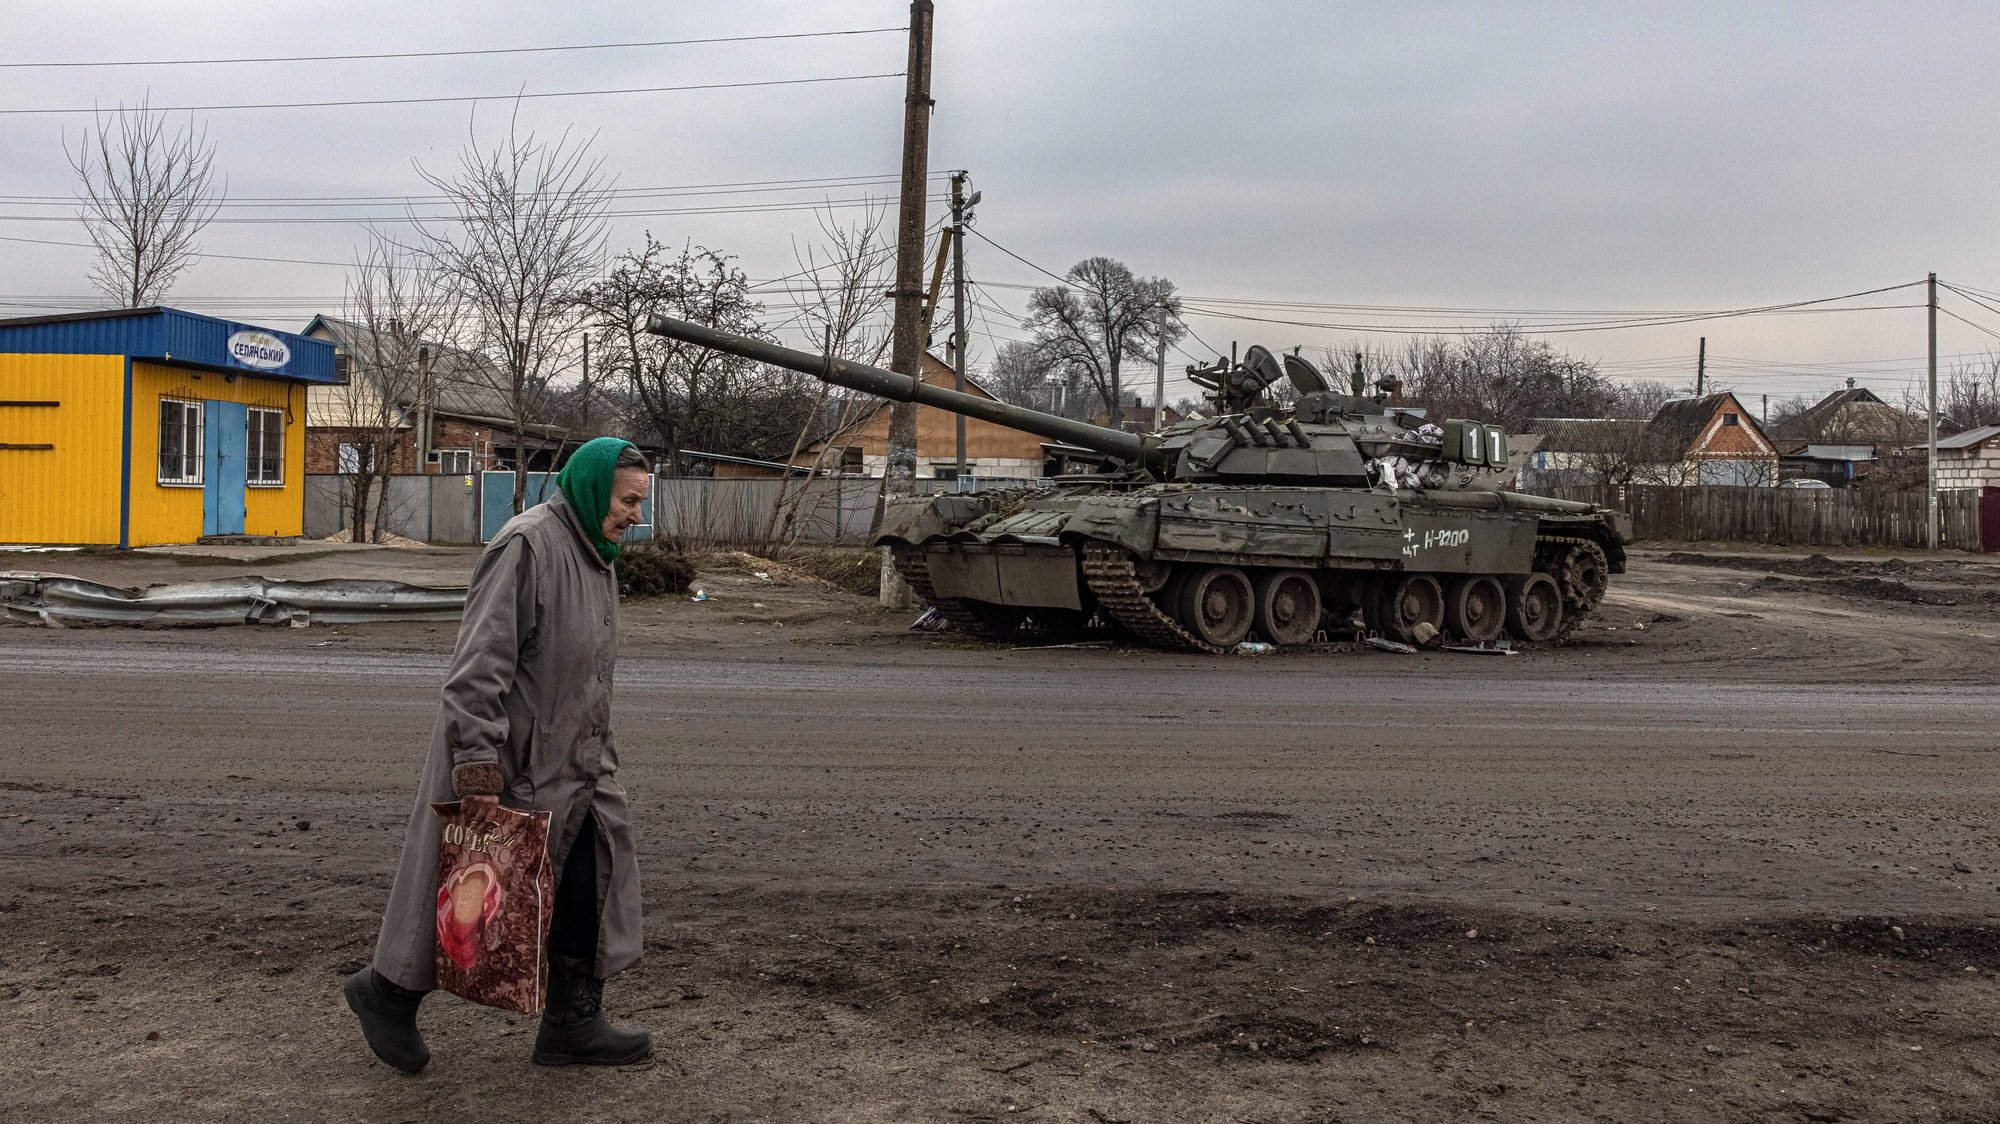 epaselect epa09861036 An elderly woman walks past a damaged Russian tank in recaptured by the Ukrainian army Trostyanets town, in Sumy region, Ukraine, 30 March 2022. Trostyanets was recaptured by the Ukrainian army after the town was under the control of Russian forces for over a month following the invasion on 24 February. The local residents claim that Russian soldiers were not letting bury the dead people, forcing many to leave their homes to move into those houses, and were looting in the town. Locals were saying that some of the town&#039;s residents were killed by Russian soldiers. When the Russian army was withdrawing from Trostyanets they stole many cars from local people, as well as different electronic devices.  EPA/ROMAN PILIPEY